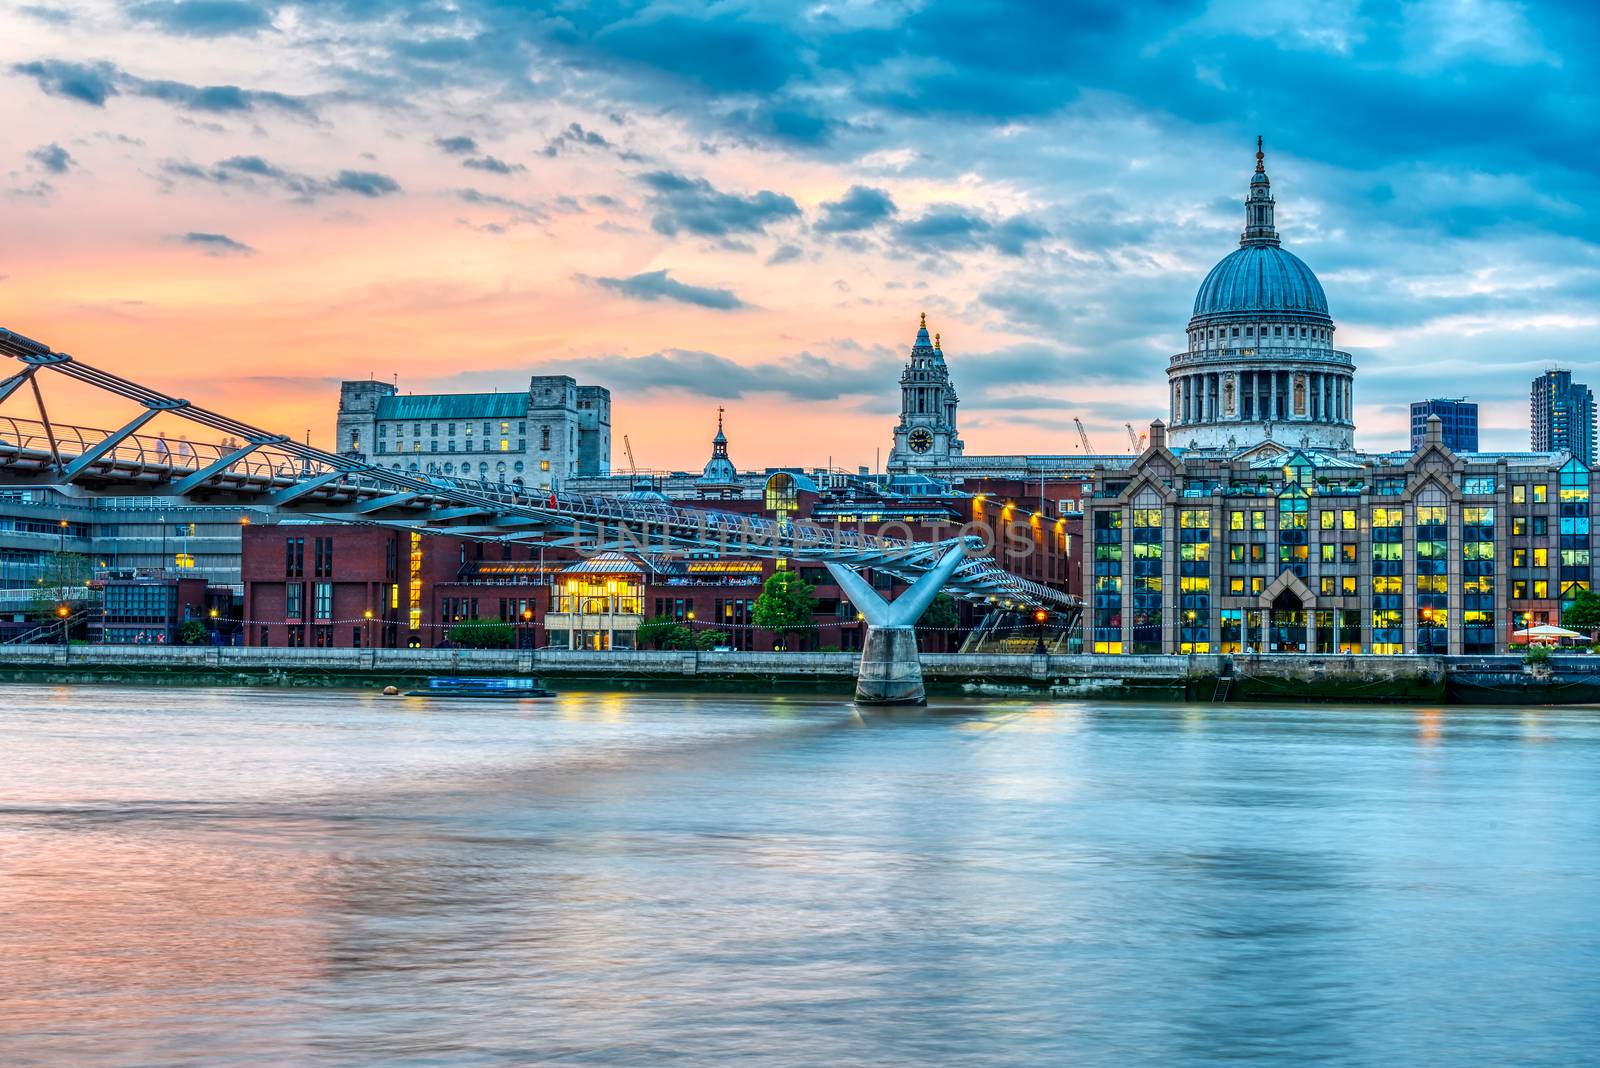 St. Paul's Cathedral and the Millennium Bridge in London, UK, after sunset